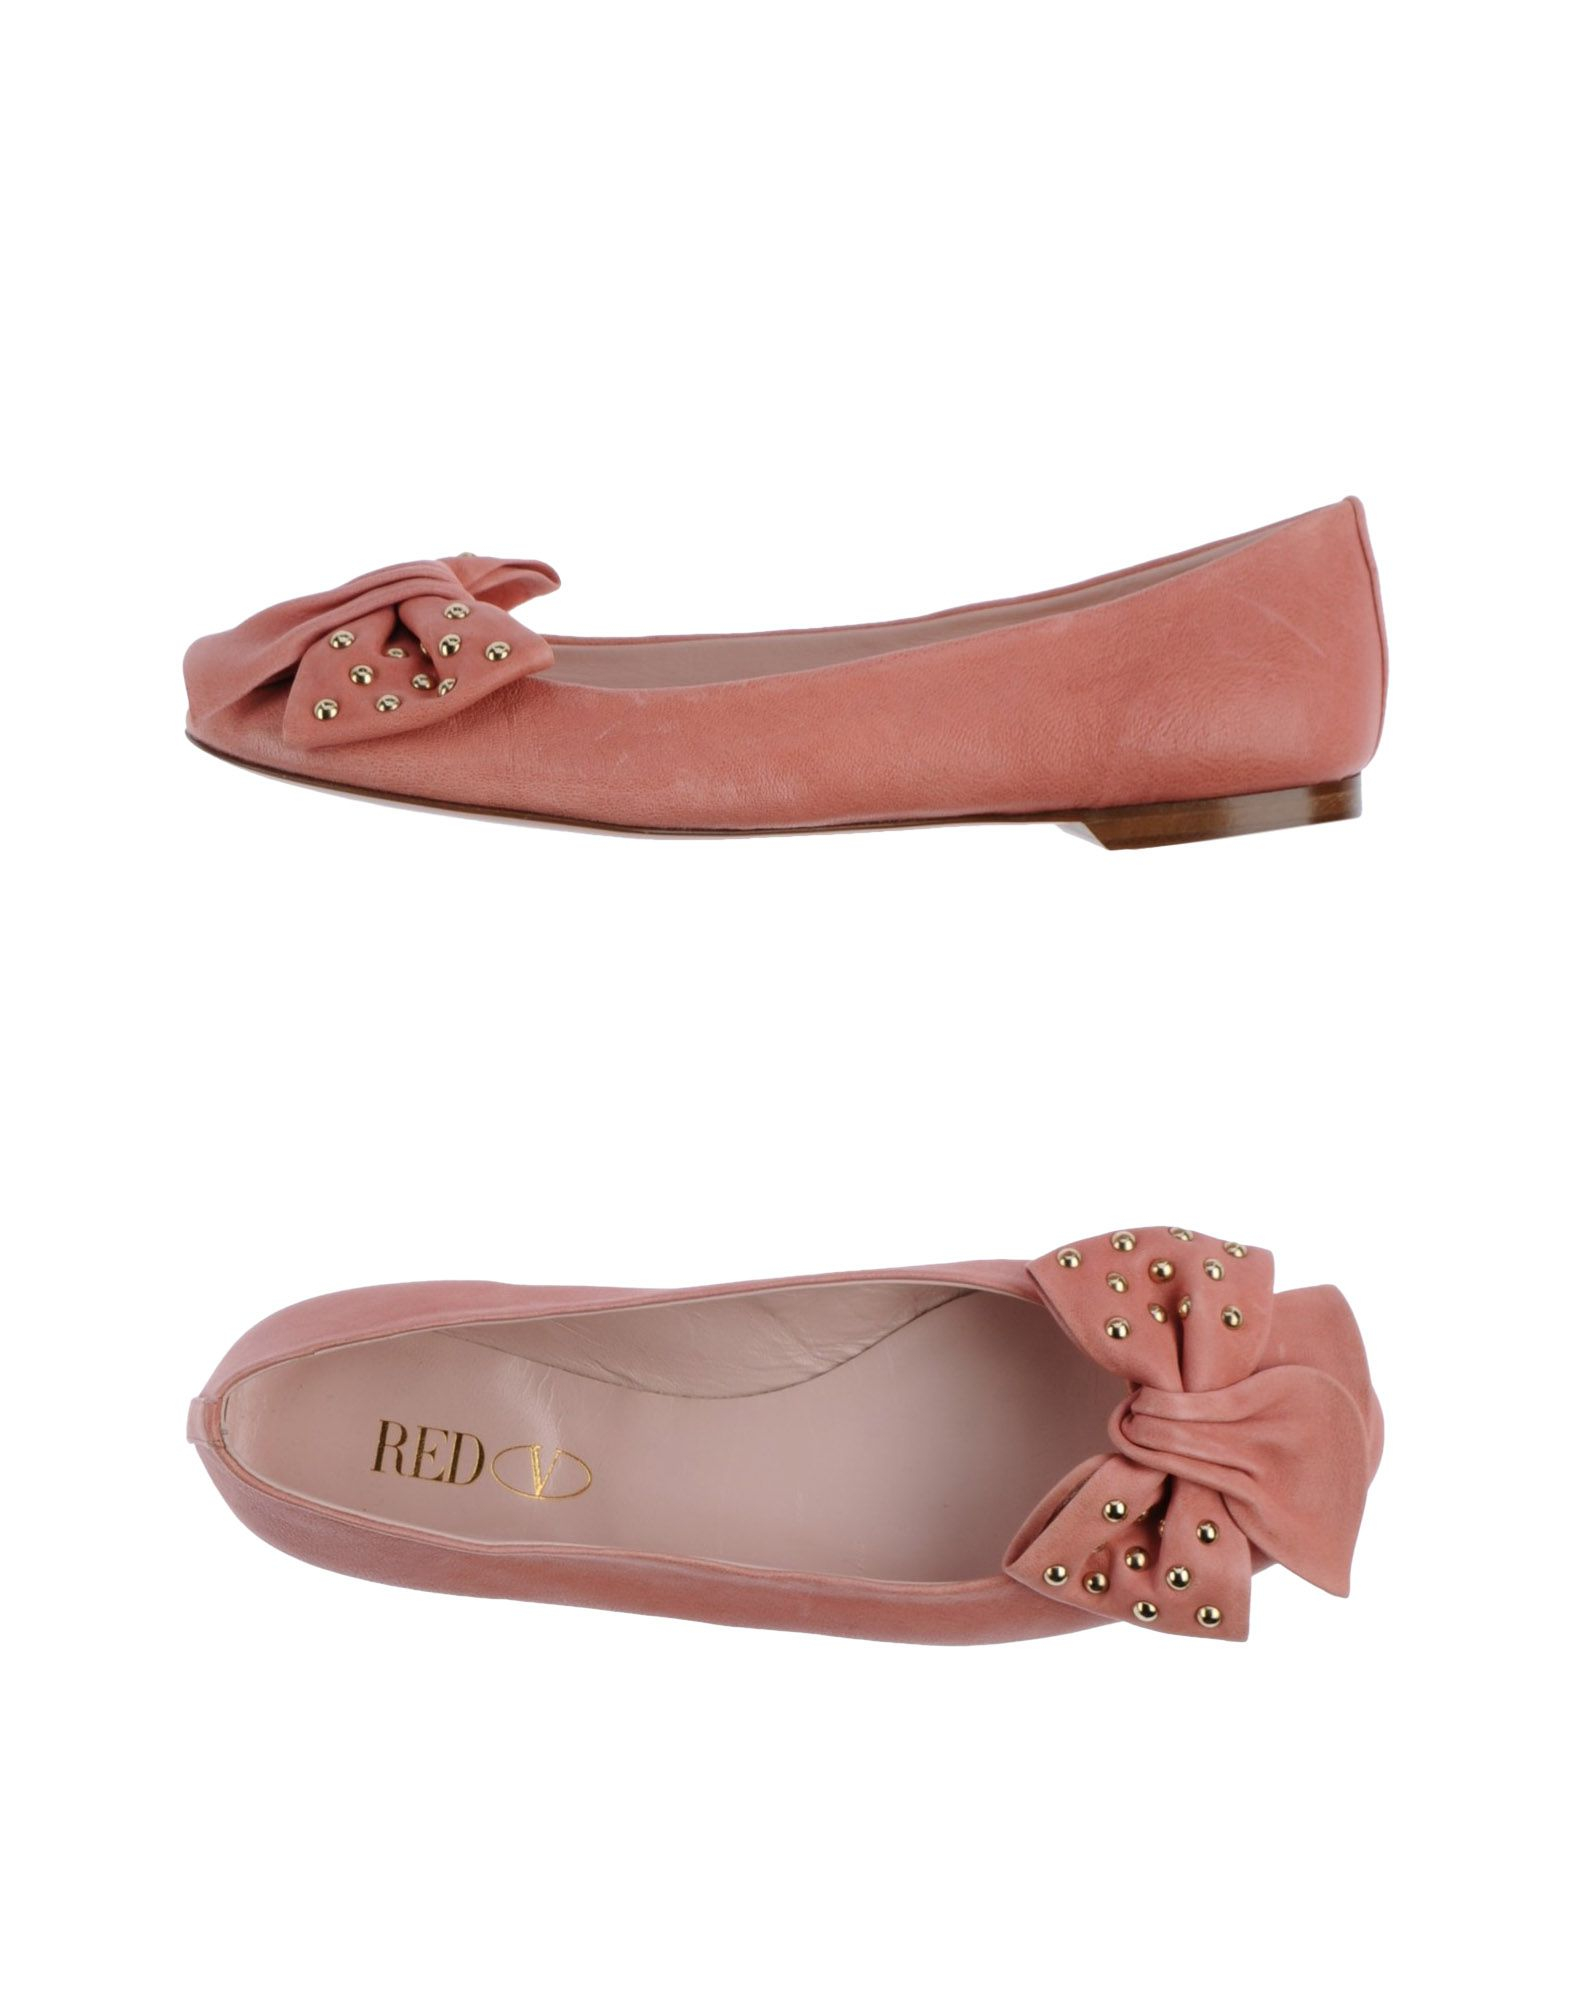 Red Valentino Bow-Detail Ballet Flats in Pink | Lyst